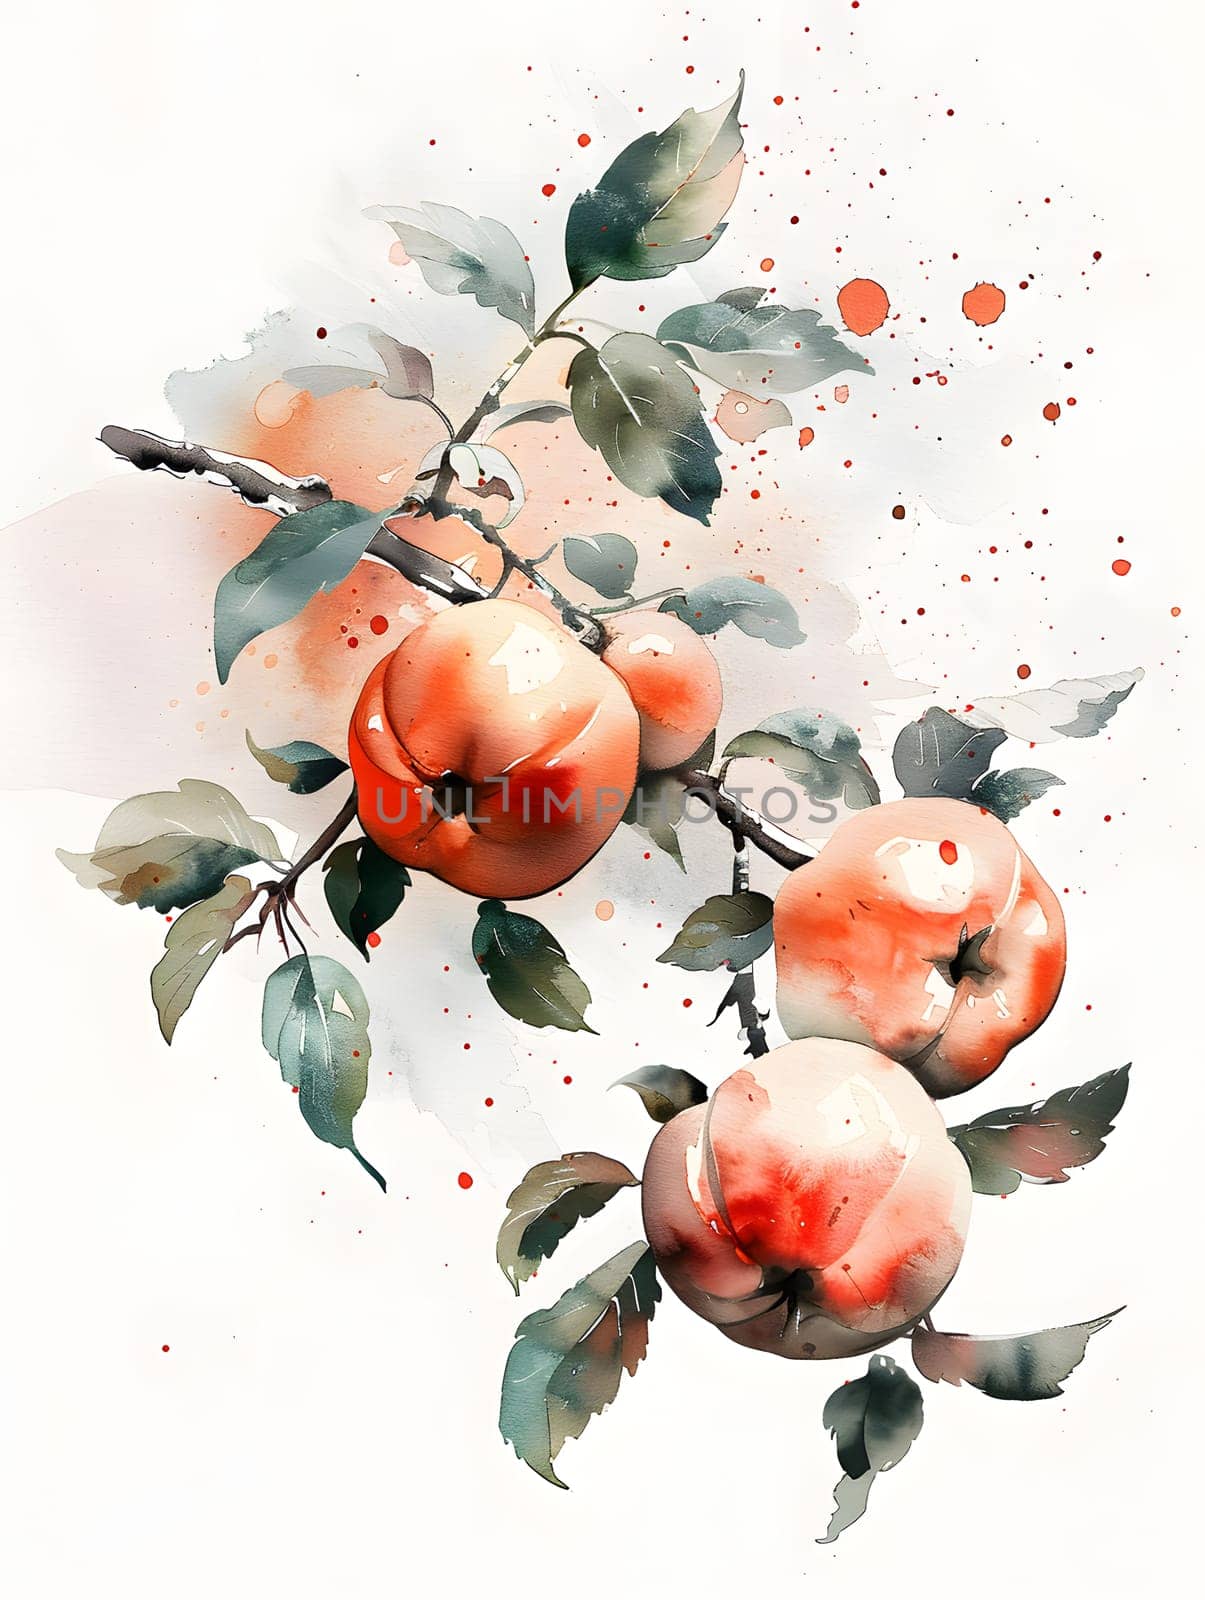 Watercolor painting of three apples on a tree branch by Nadtochiy